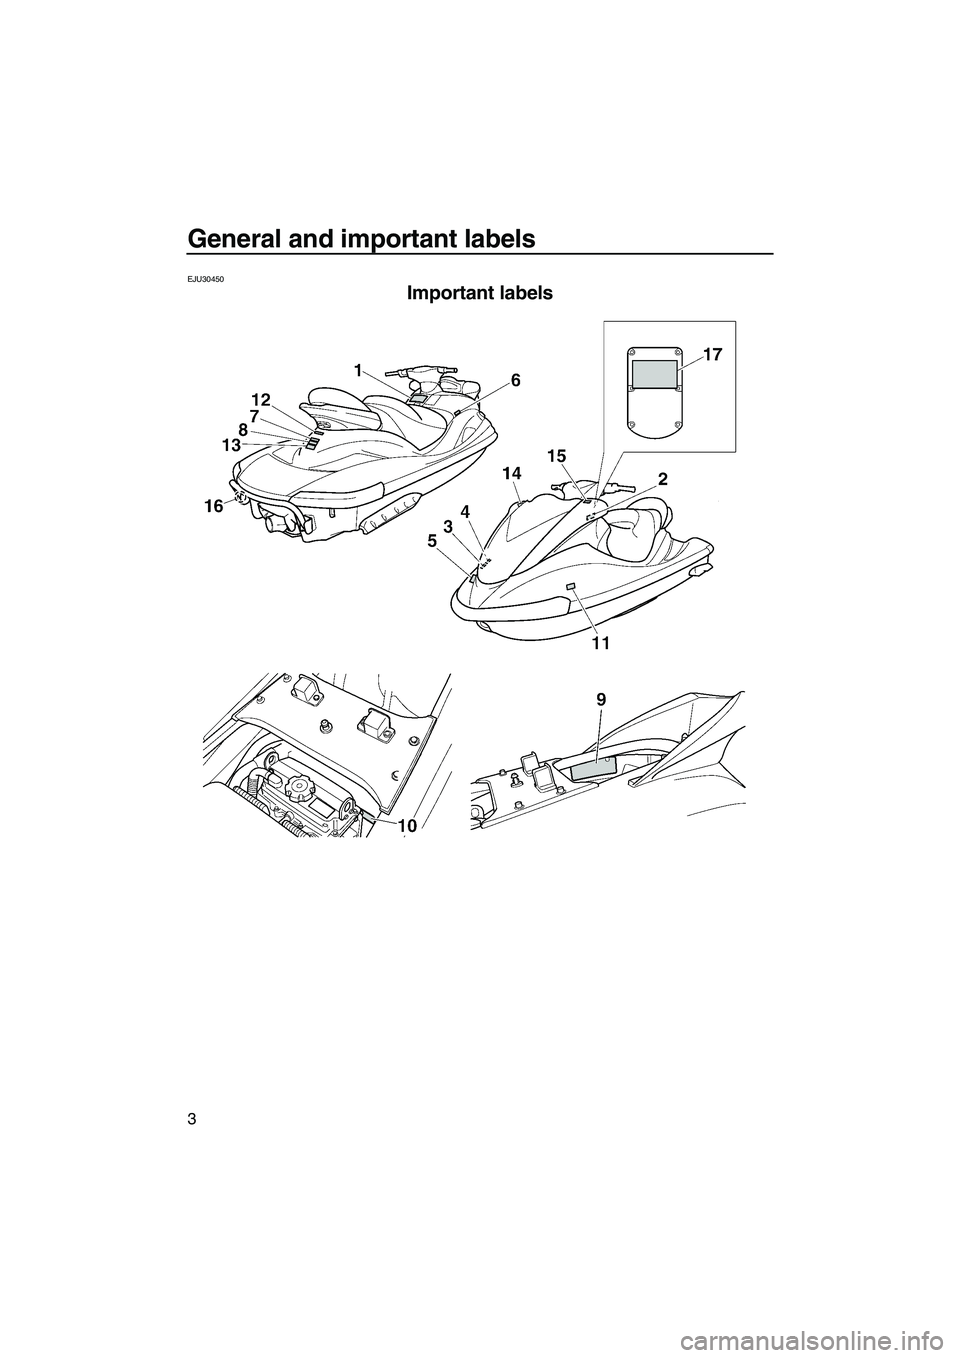 YAMAHA FX HO CRUISER 2007  Owners Manual General and important labels
3
EJU30450
Important labels 
UF1X71E0.book  Page 3  Tuesday, September 26, 2006  9:52 AM 